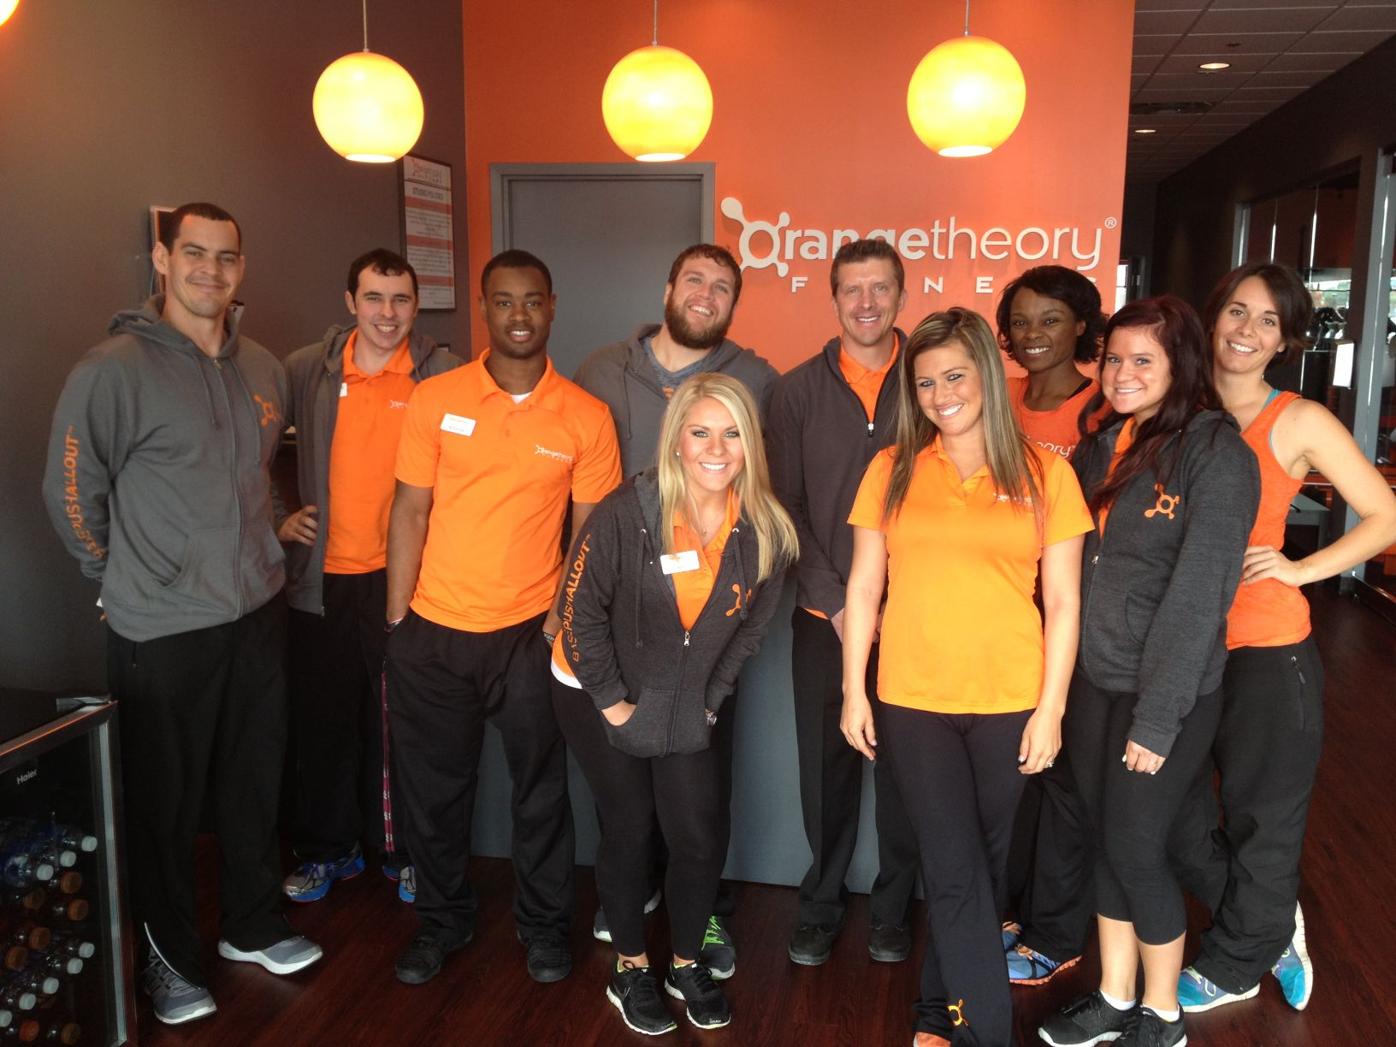 Local Orangetheory Fitness clients win at losing in national